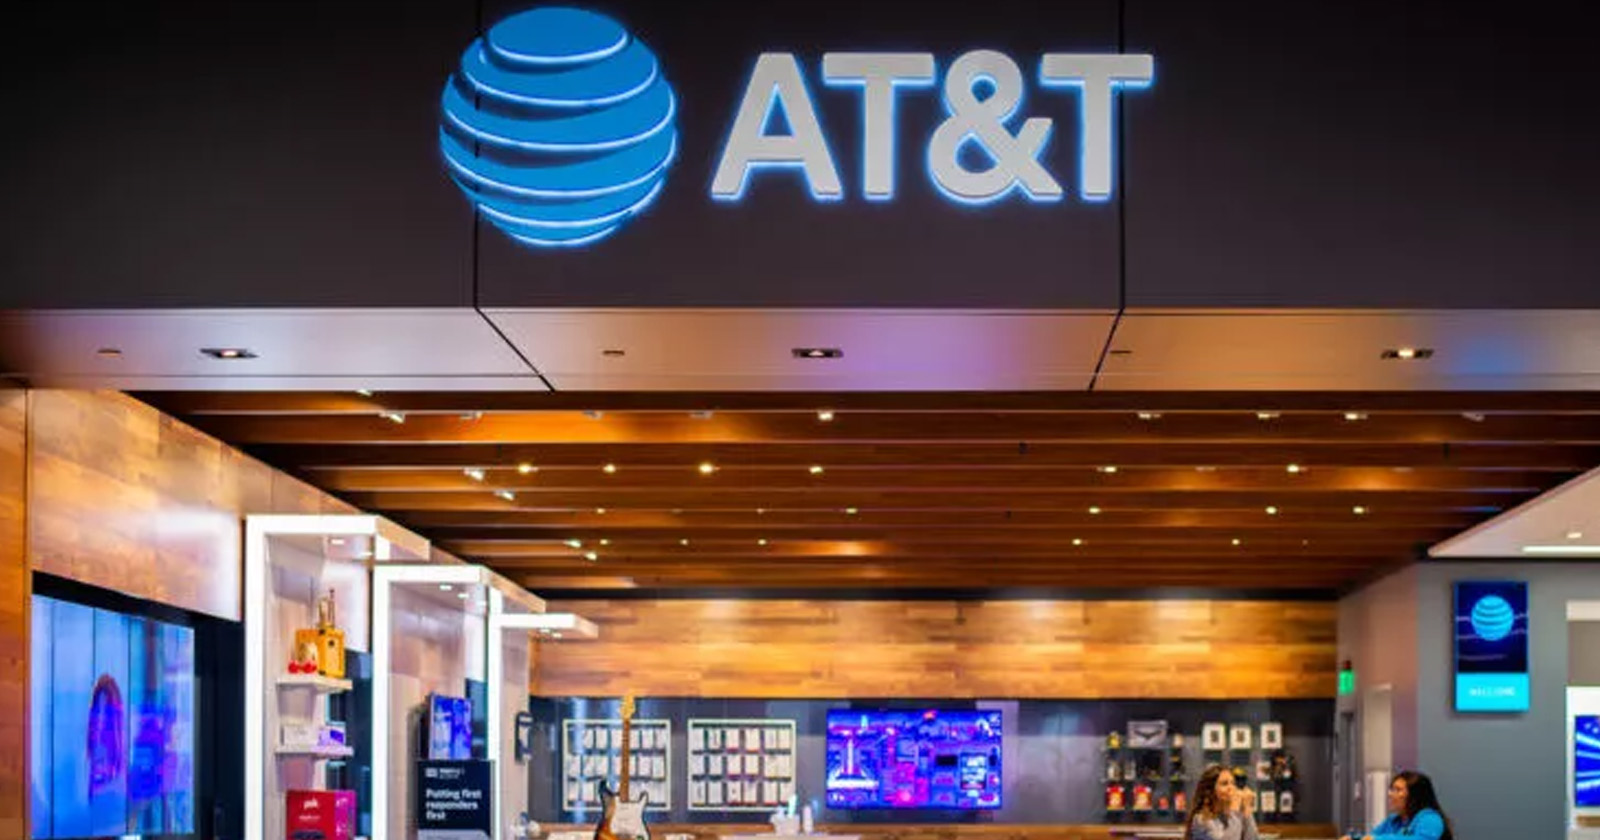 AT&T spying on citizens for years, say sources